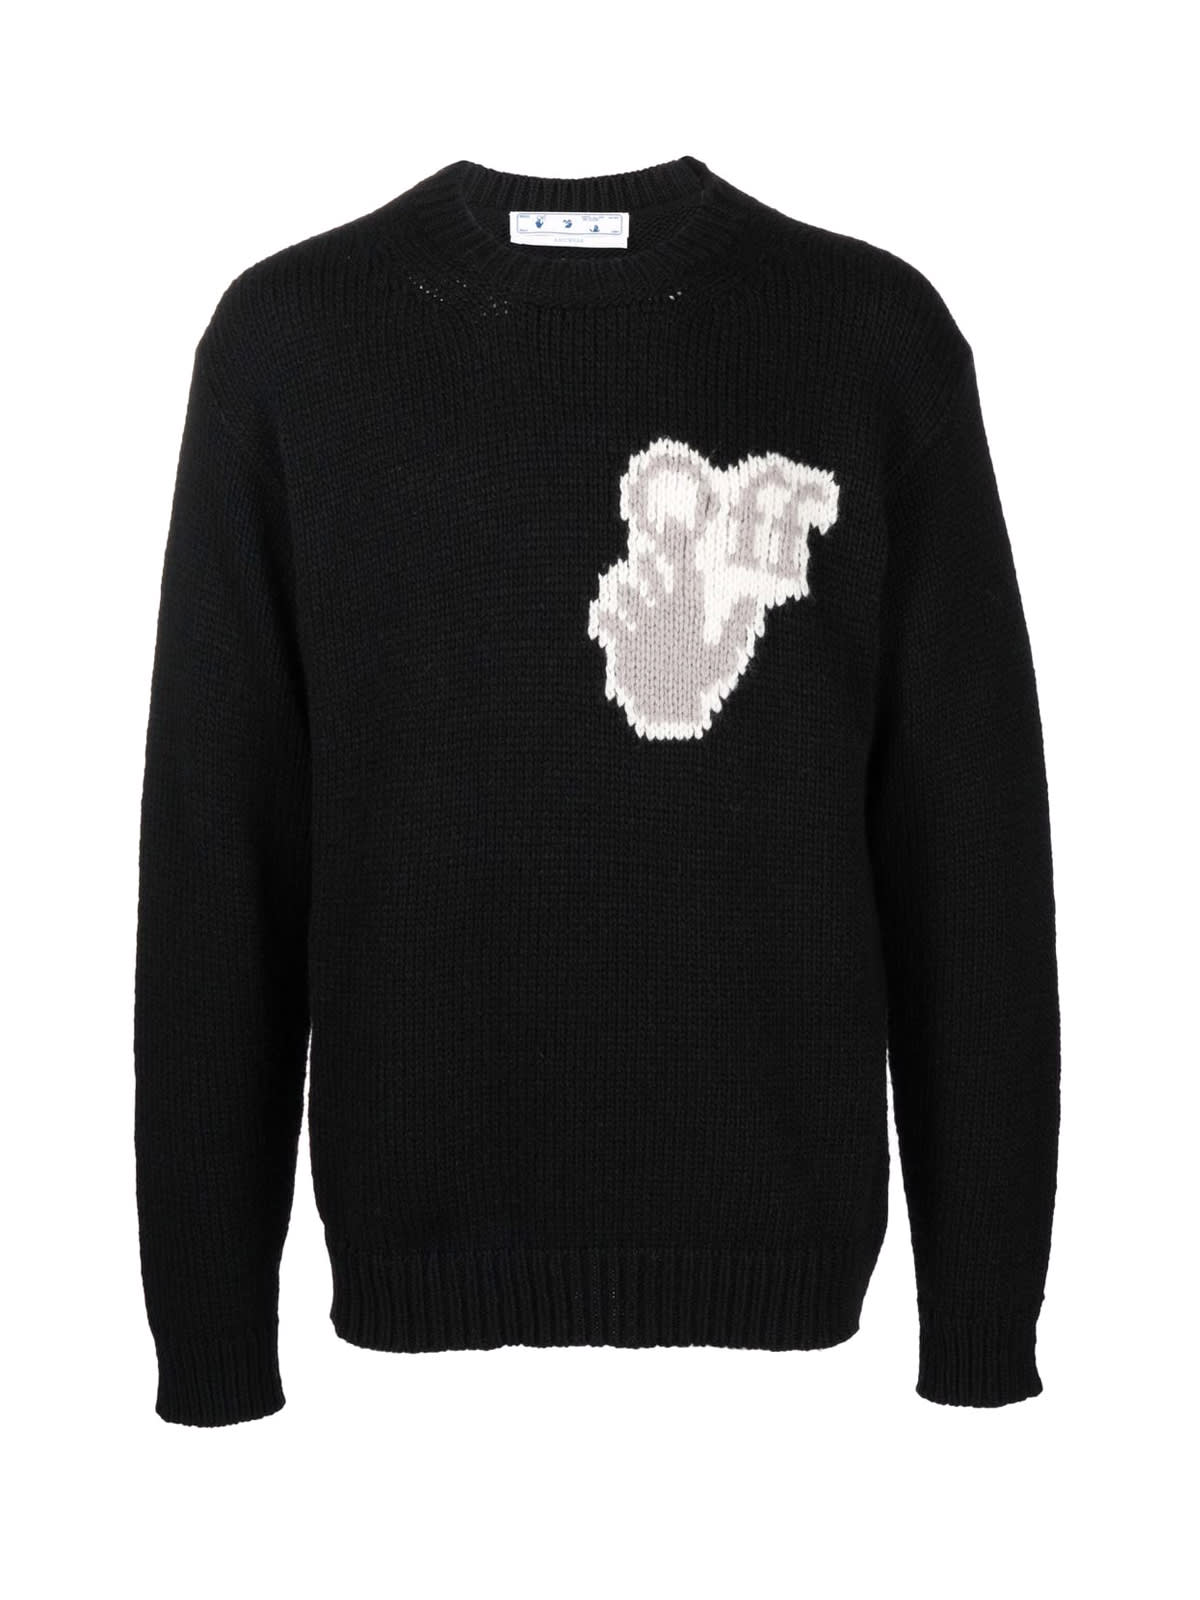 Off-White Hand Off Chunky Knit Crewneck